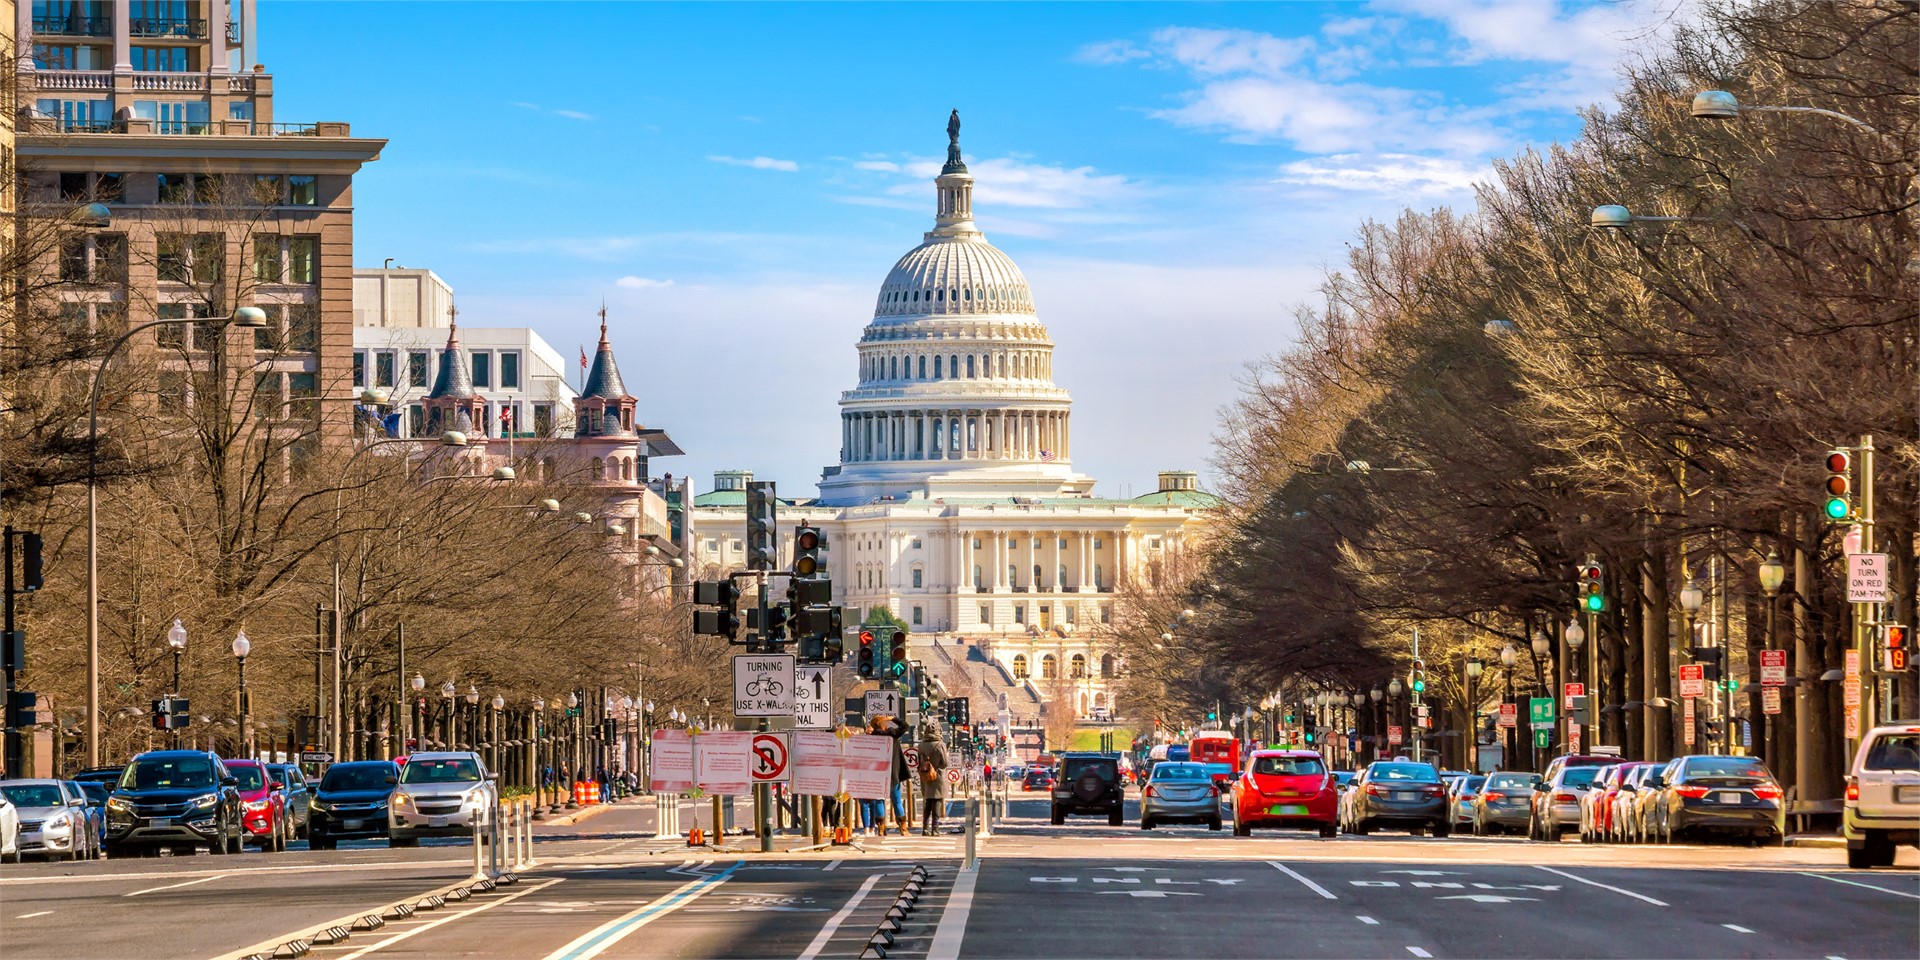 Hotels and accommodation in Washington D.C., USA
